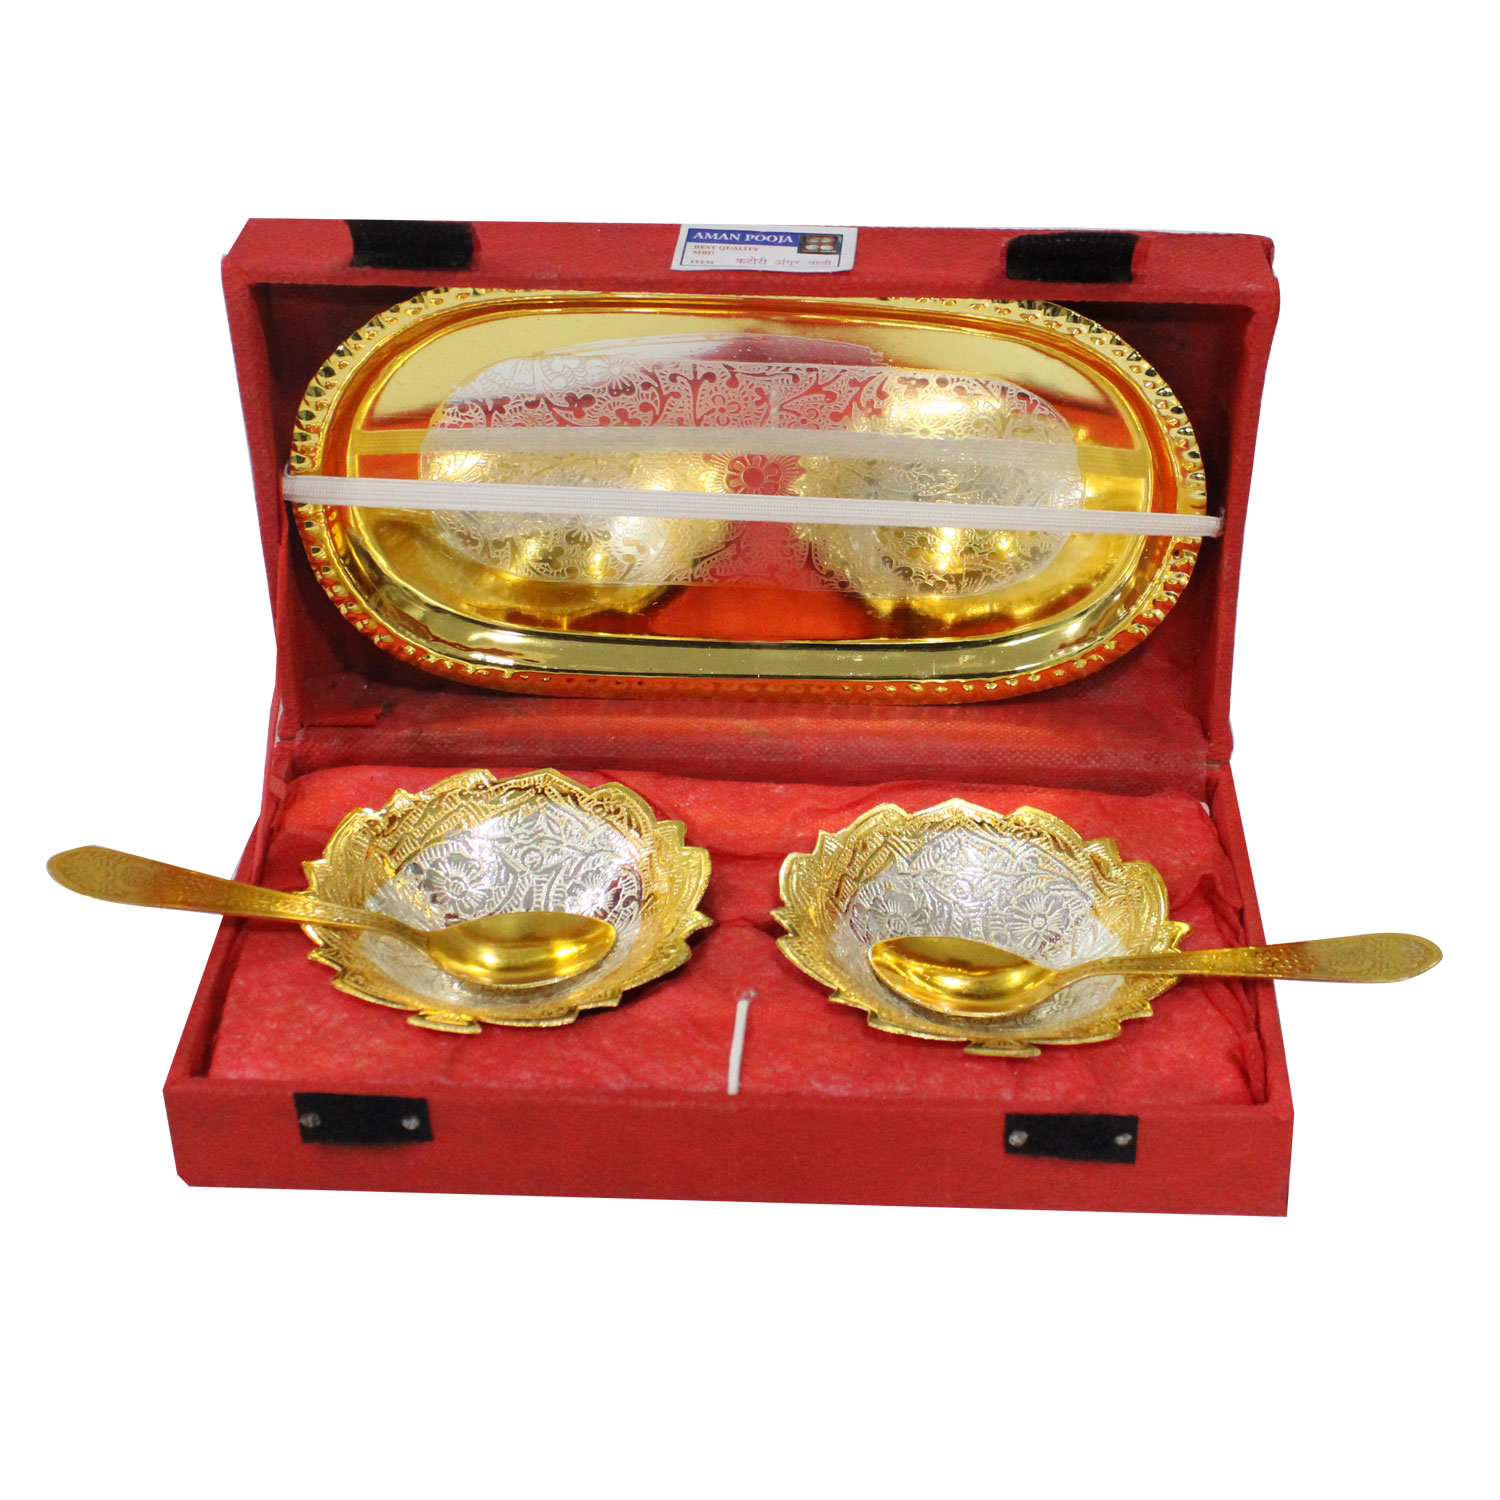 Gold Plated Bowl set of 2 with Plate